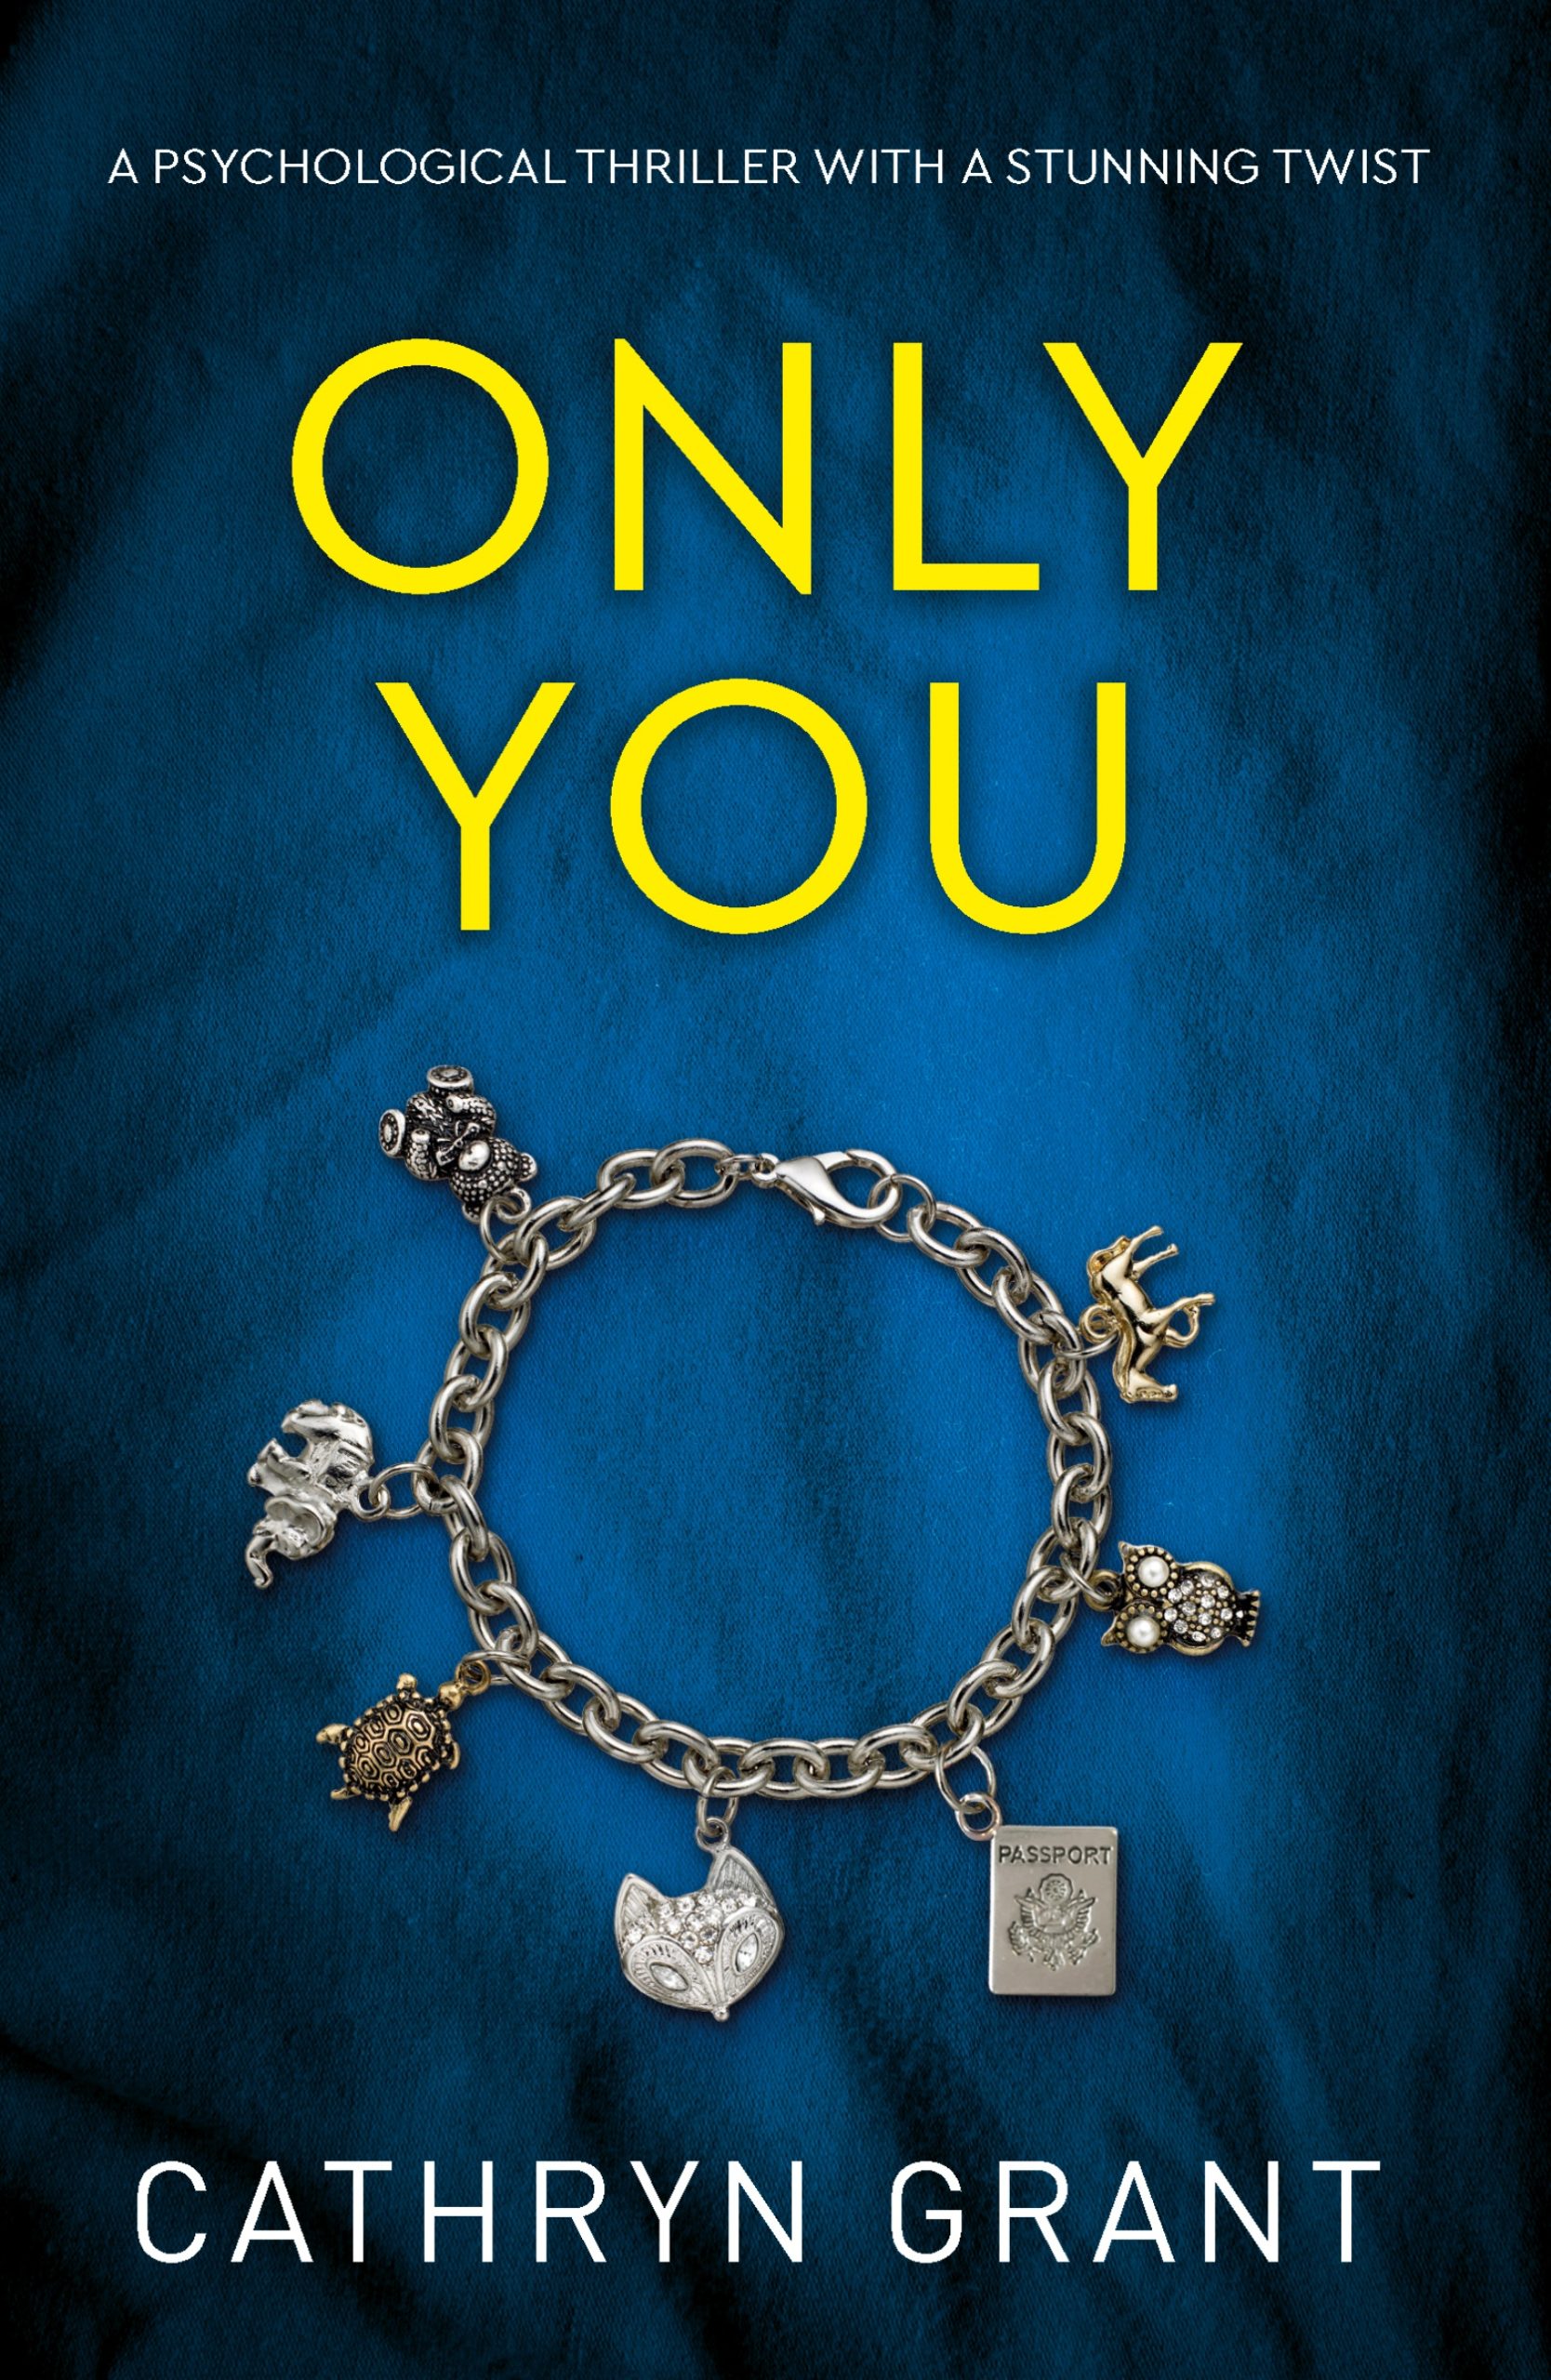 CATHRYN GRANT NEW RELEASE – ONLY YOU